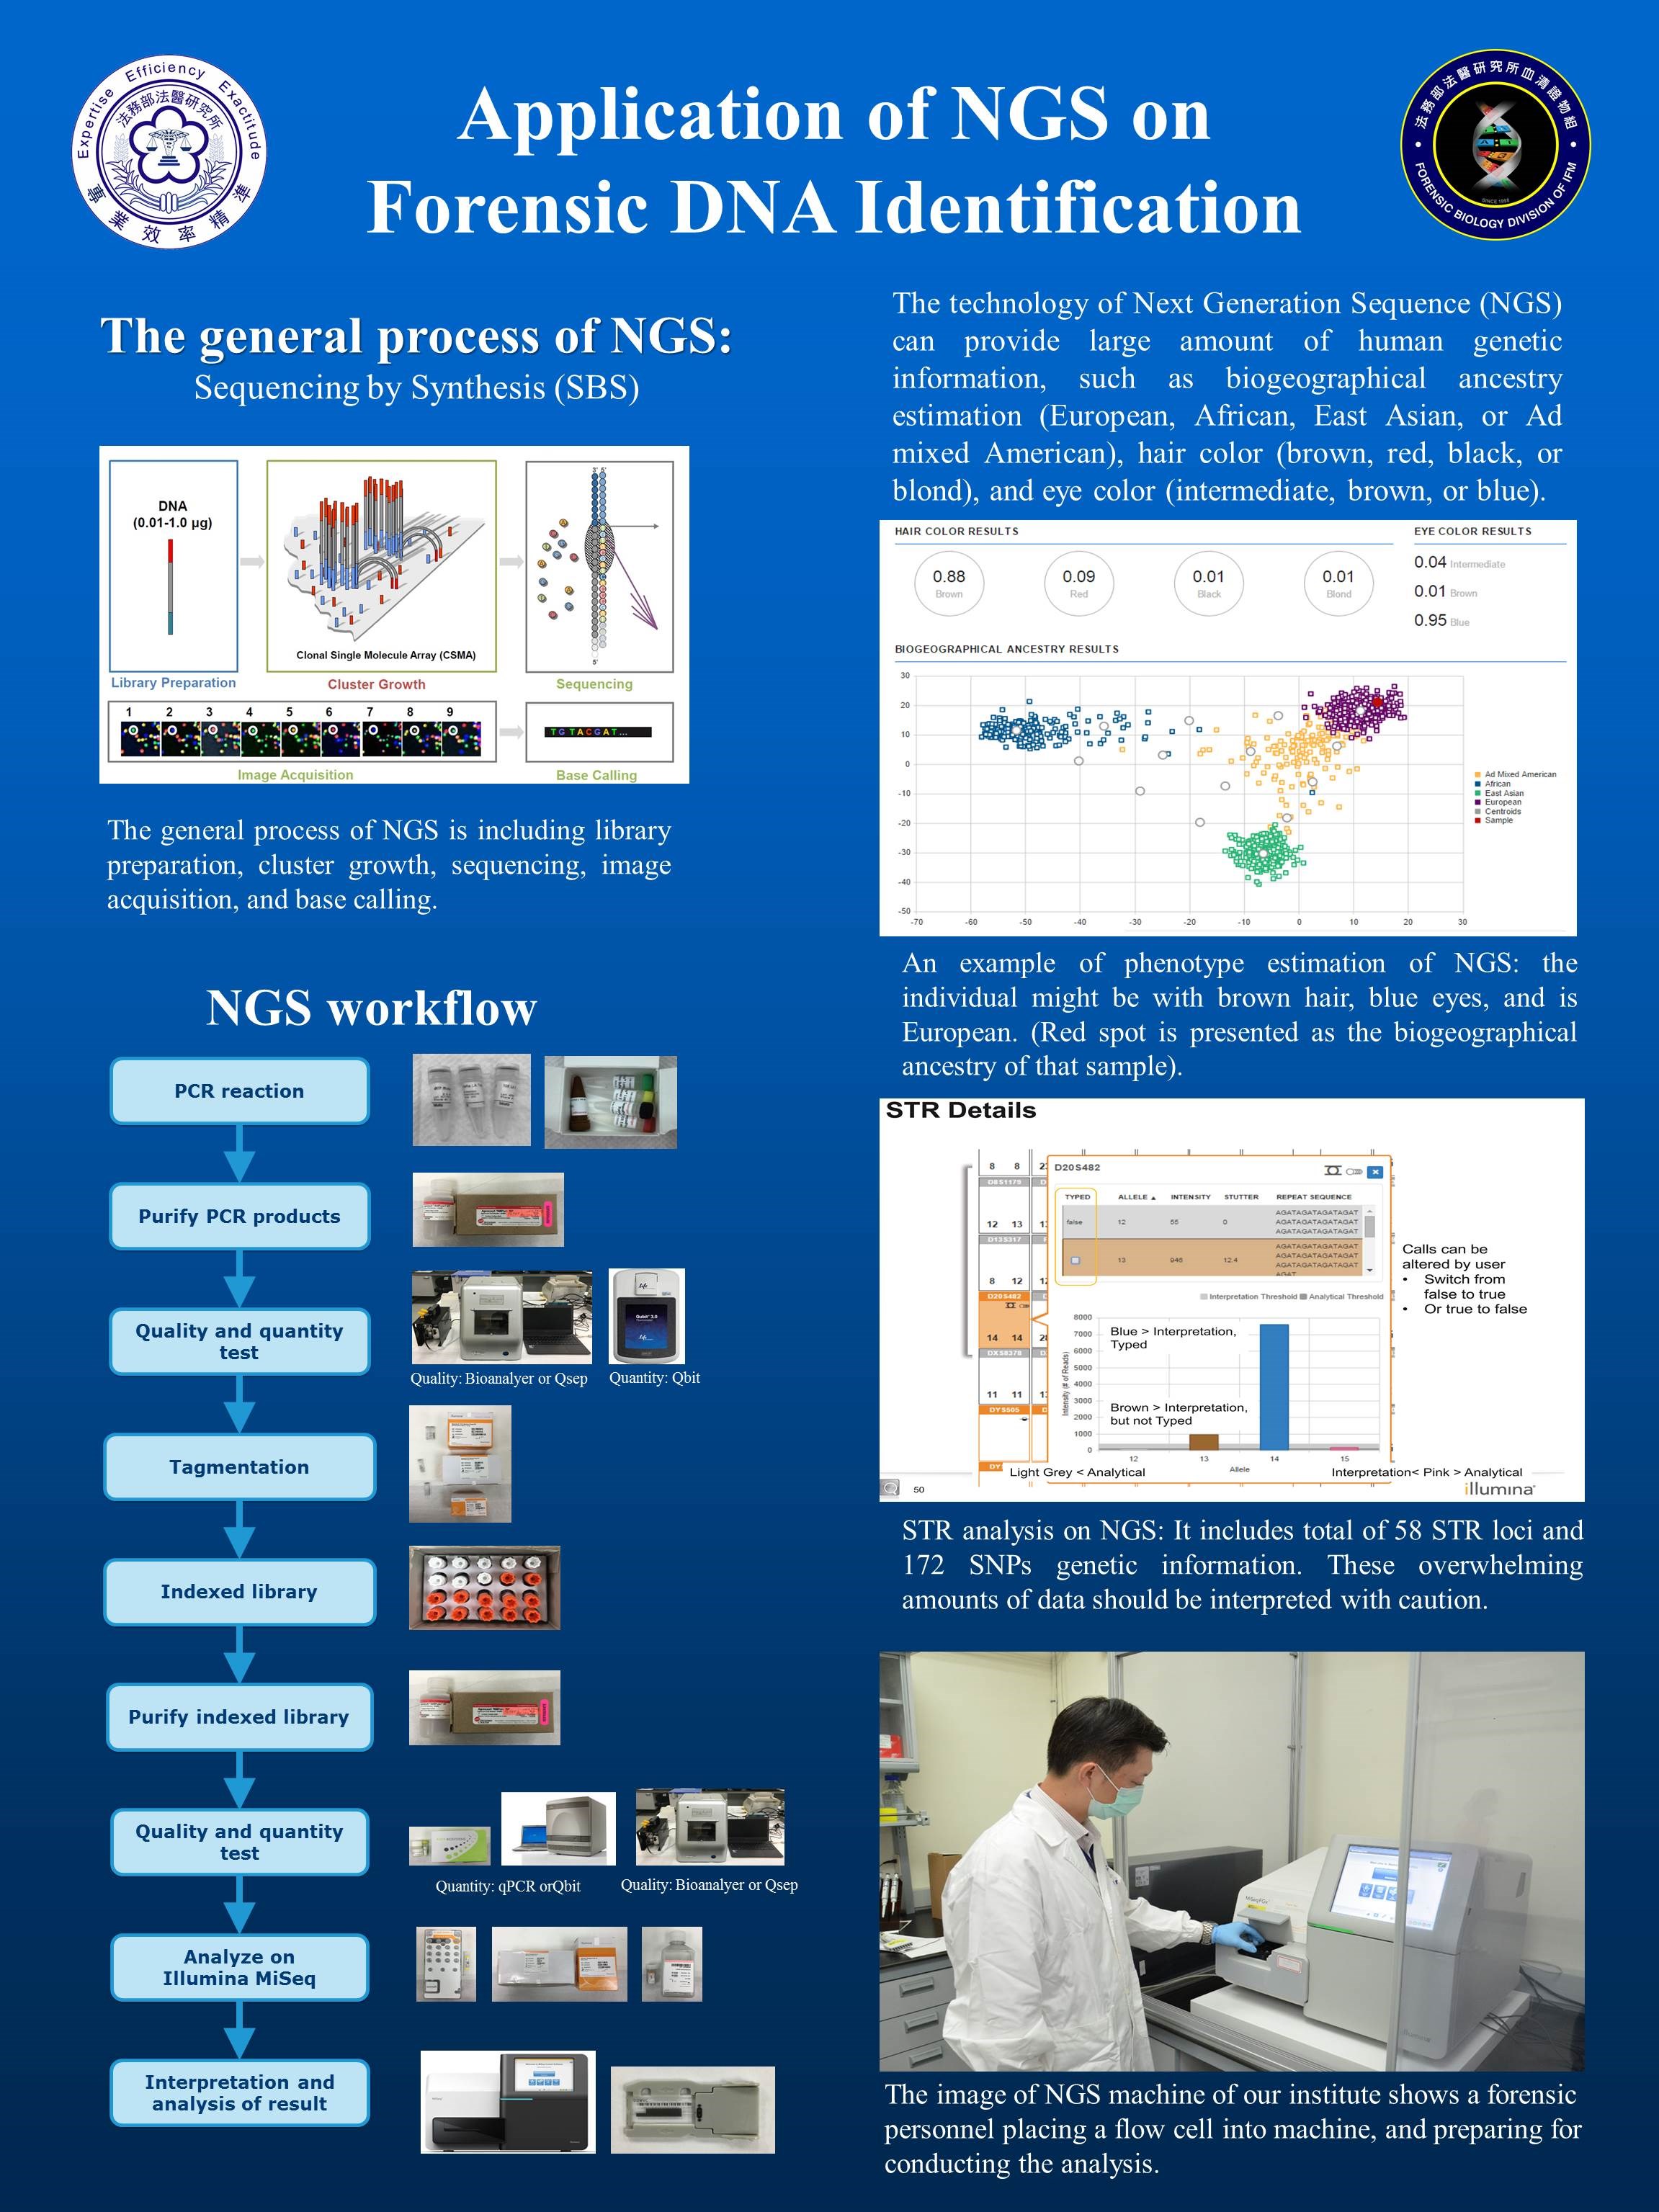 8-Application of NGS on Forensic DNA Identification_1080702_eng